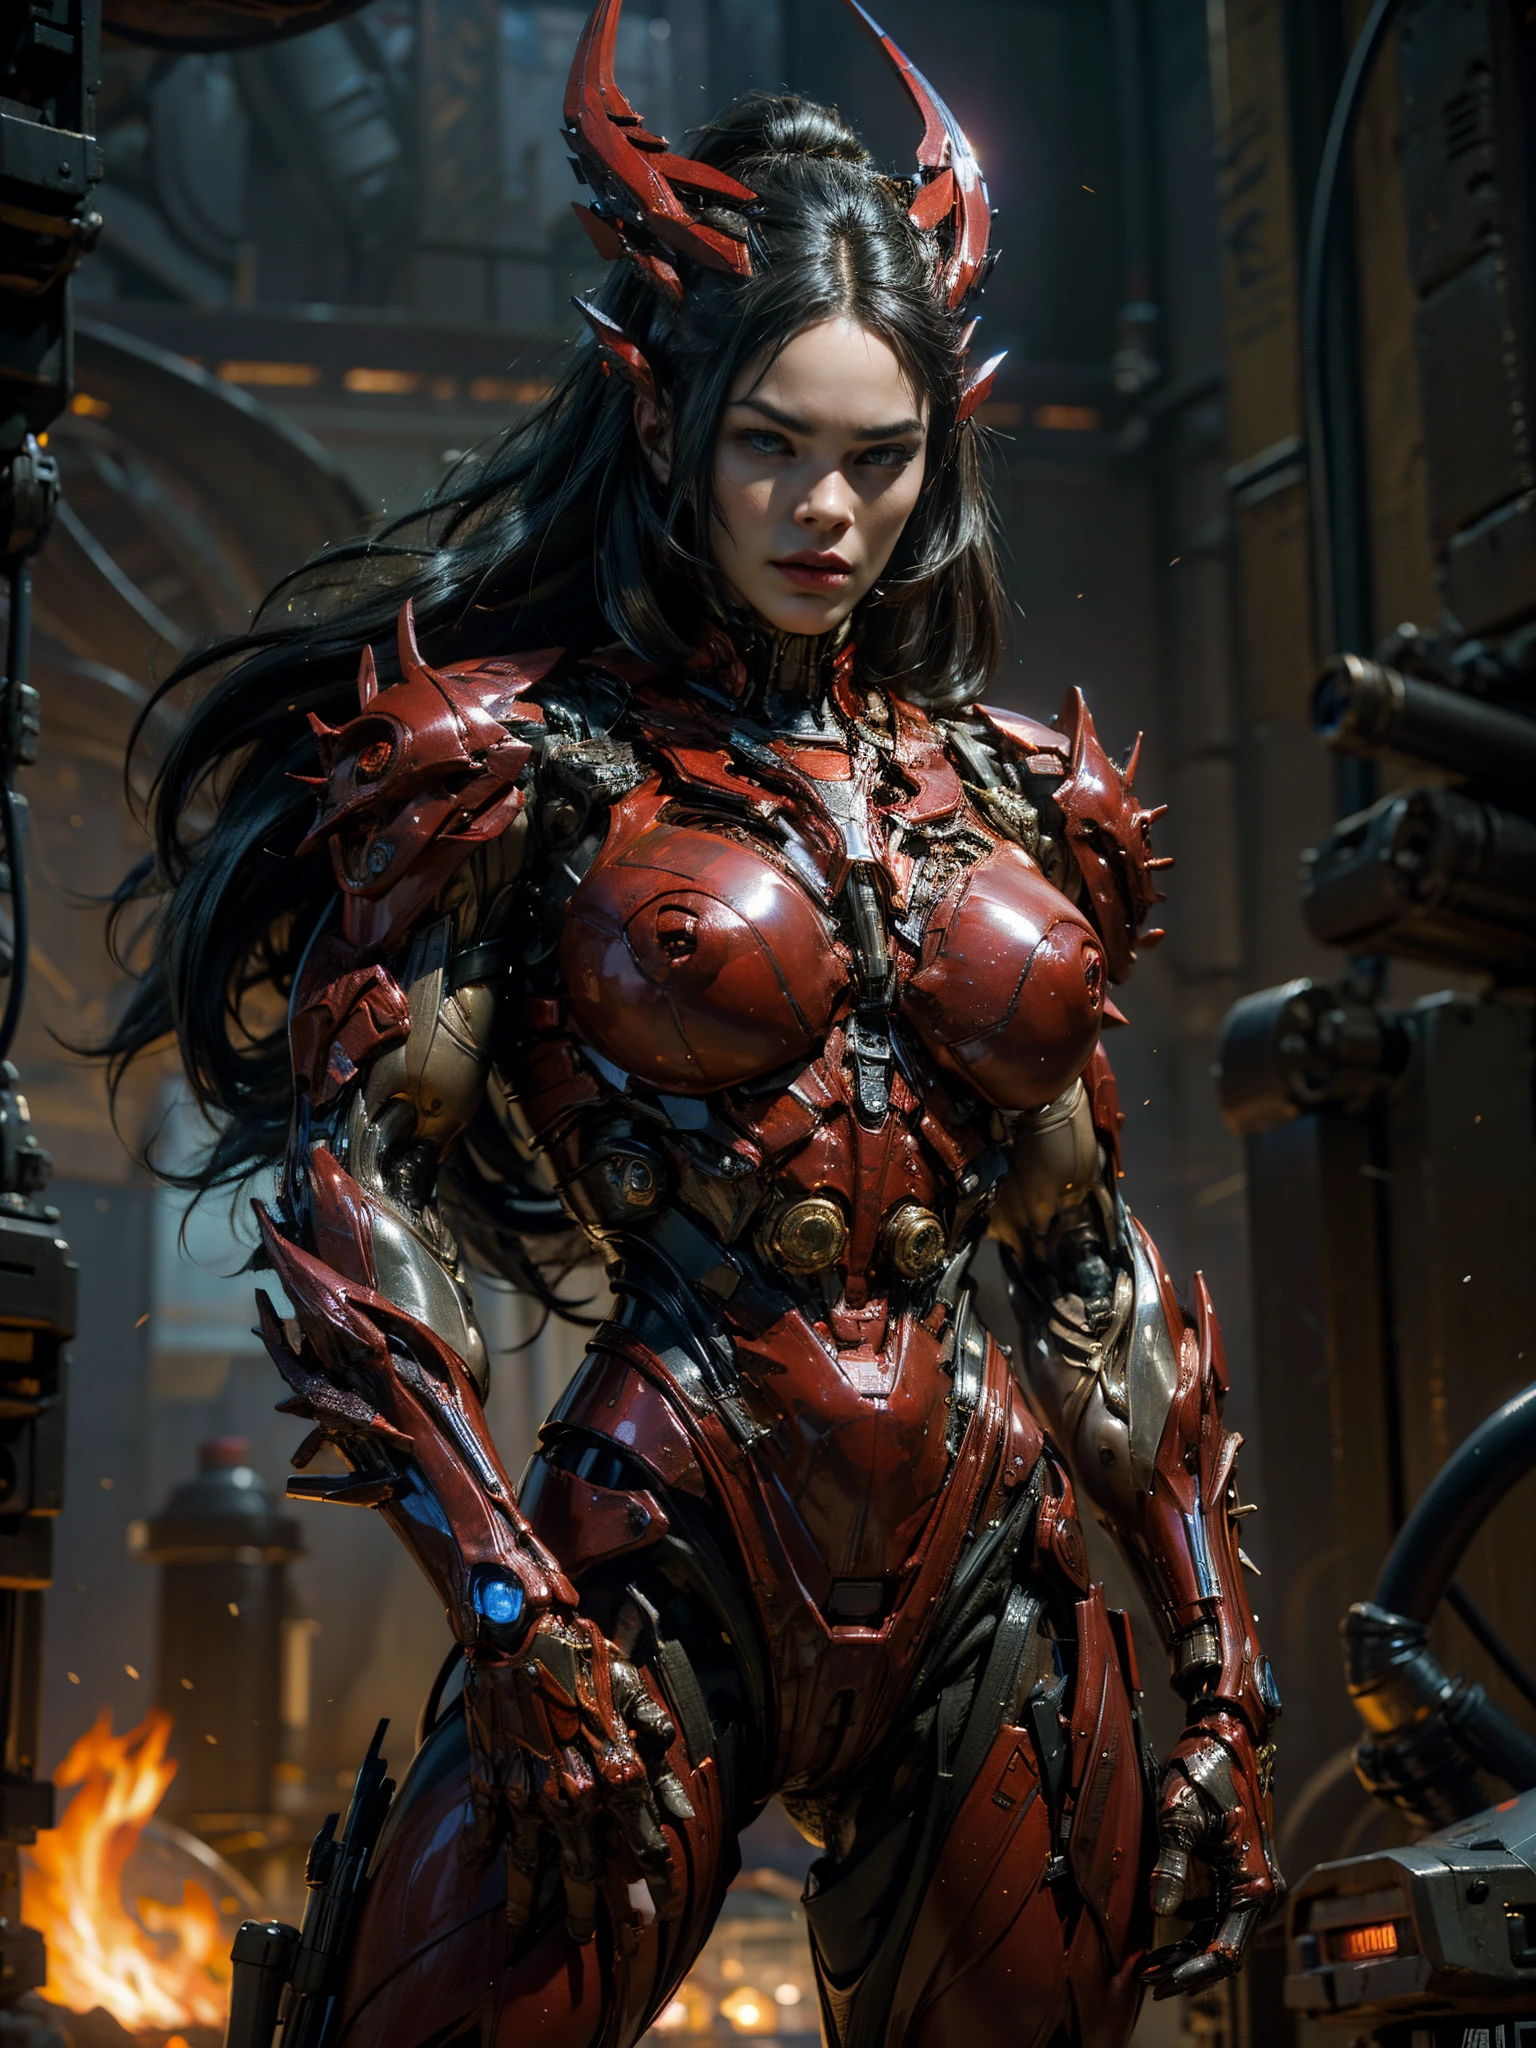 (megan fox), Cinematic, hyper-detailed, and insanely detailed, this artwork captures the essence of a hairless muscular female android girl. Beautiful color grading, enhancing the overall cinematic feel. Unreal Engine brings her anatomic cybernetic muscle suit to life, appearing even more mesmerizing. With the use of depth of field (DOF), every detail is focused and accentuated, drawing attention to her eyes and the intricate design of the anatomic cybernetic muscle suit . The image resolution is at its peak, utilizing super-resolution technology to ensure every pixel is perfect. Cinematic lighting enhances her aura, while anti-aliasing techniques like FXAA and TXAA keep the edges smooth and clean. Adding realism to the anatomic cybernetic muscle suit, RTX technology enables ray tracing. Additionally, SSAO (Screen Space Ambient Occlusion) gives depth and realism to the scene, the girl's anatomic cybernetic muscle suit become even more convincing. In the post-processing and post-production stages, tone mapping enhances the colors, creating a captivating visual experience. The integration of CGI (Computer-Generated Imagery) and VFX (Visual Effect brings out the anatomic cybernetic muscle suit's intricate features in a seamless manner. SFX (Sound Effects) complement the visual artistry, immersing the viewer further into this fantastic world. The level of detail is awe-inspiring, with intricate elements meticulously crafted, the artwork hyper maximalist and hyper-realistic. Volumetric effects add depth and dimension, and the photorealism is unparalleled. The image is rendered in 8K resolution, ensuring super-detailed visuals. The volumetric lightning adds a touch of magic, highlighting her beauty and the aura of her anatomic cybernetic muscle suit in an otherworldly way. High Dynamic Range (HDR) technology makes the colors pop, adding richness to the overall composition. Ultimately, this artwork presents an unreal portrayal of a super muscled cybernetic female android